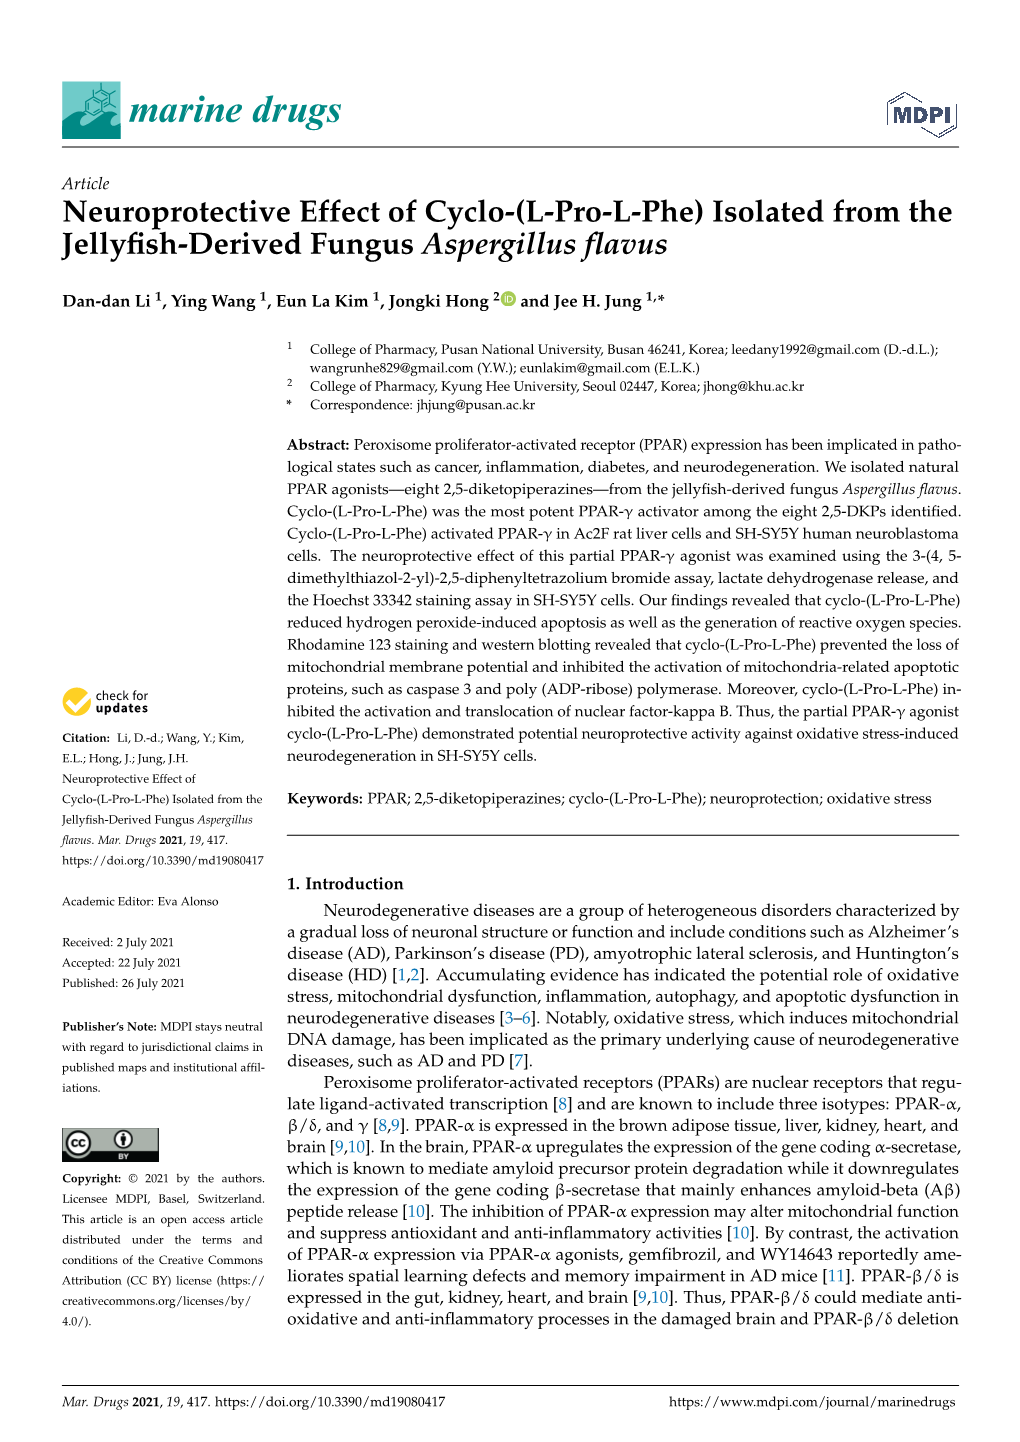 Neuroprotective Effect of Cyclo-(L-Pro-L-Phe) Isolated from the Jellyfish-Derived Fungus Aspergillus Flavus